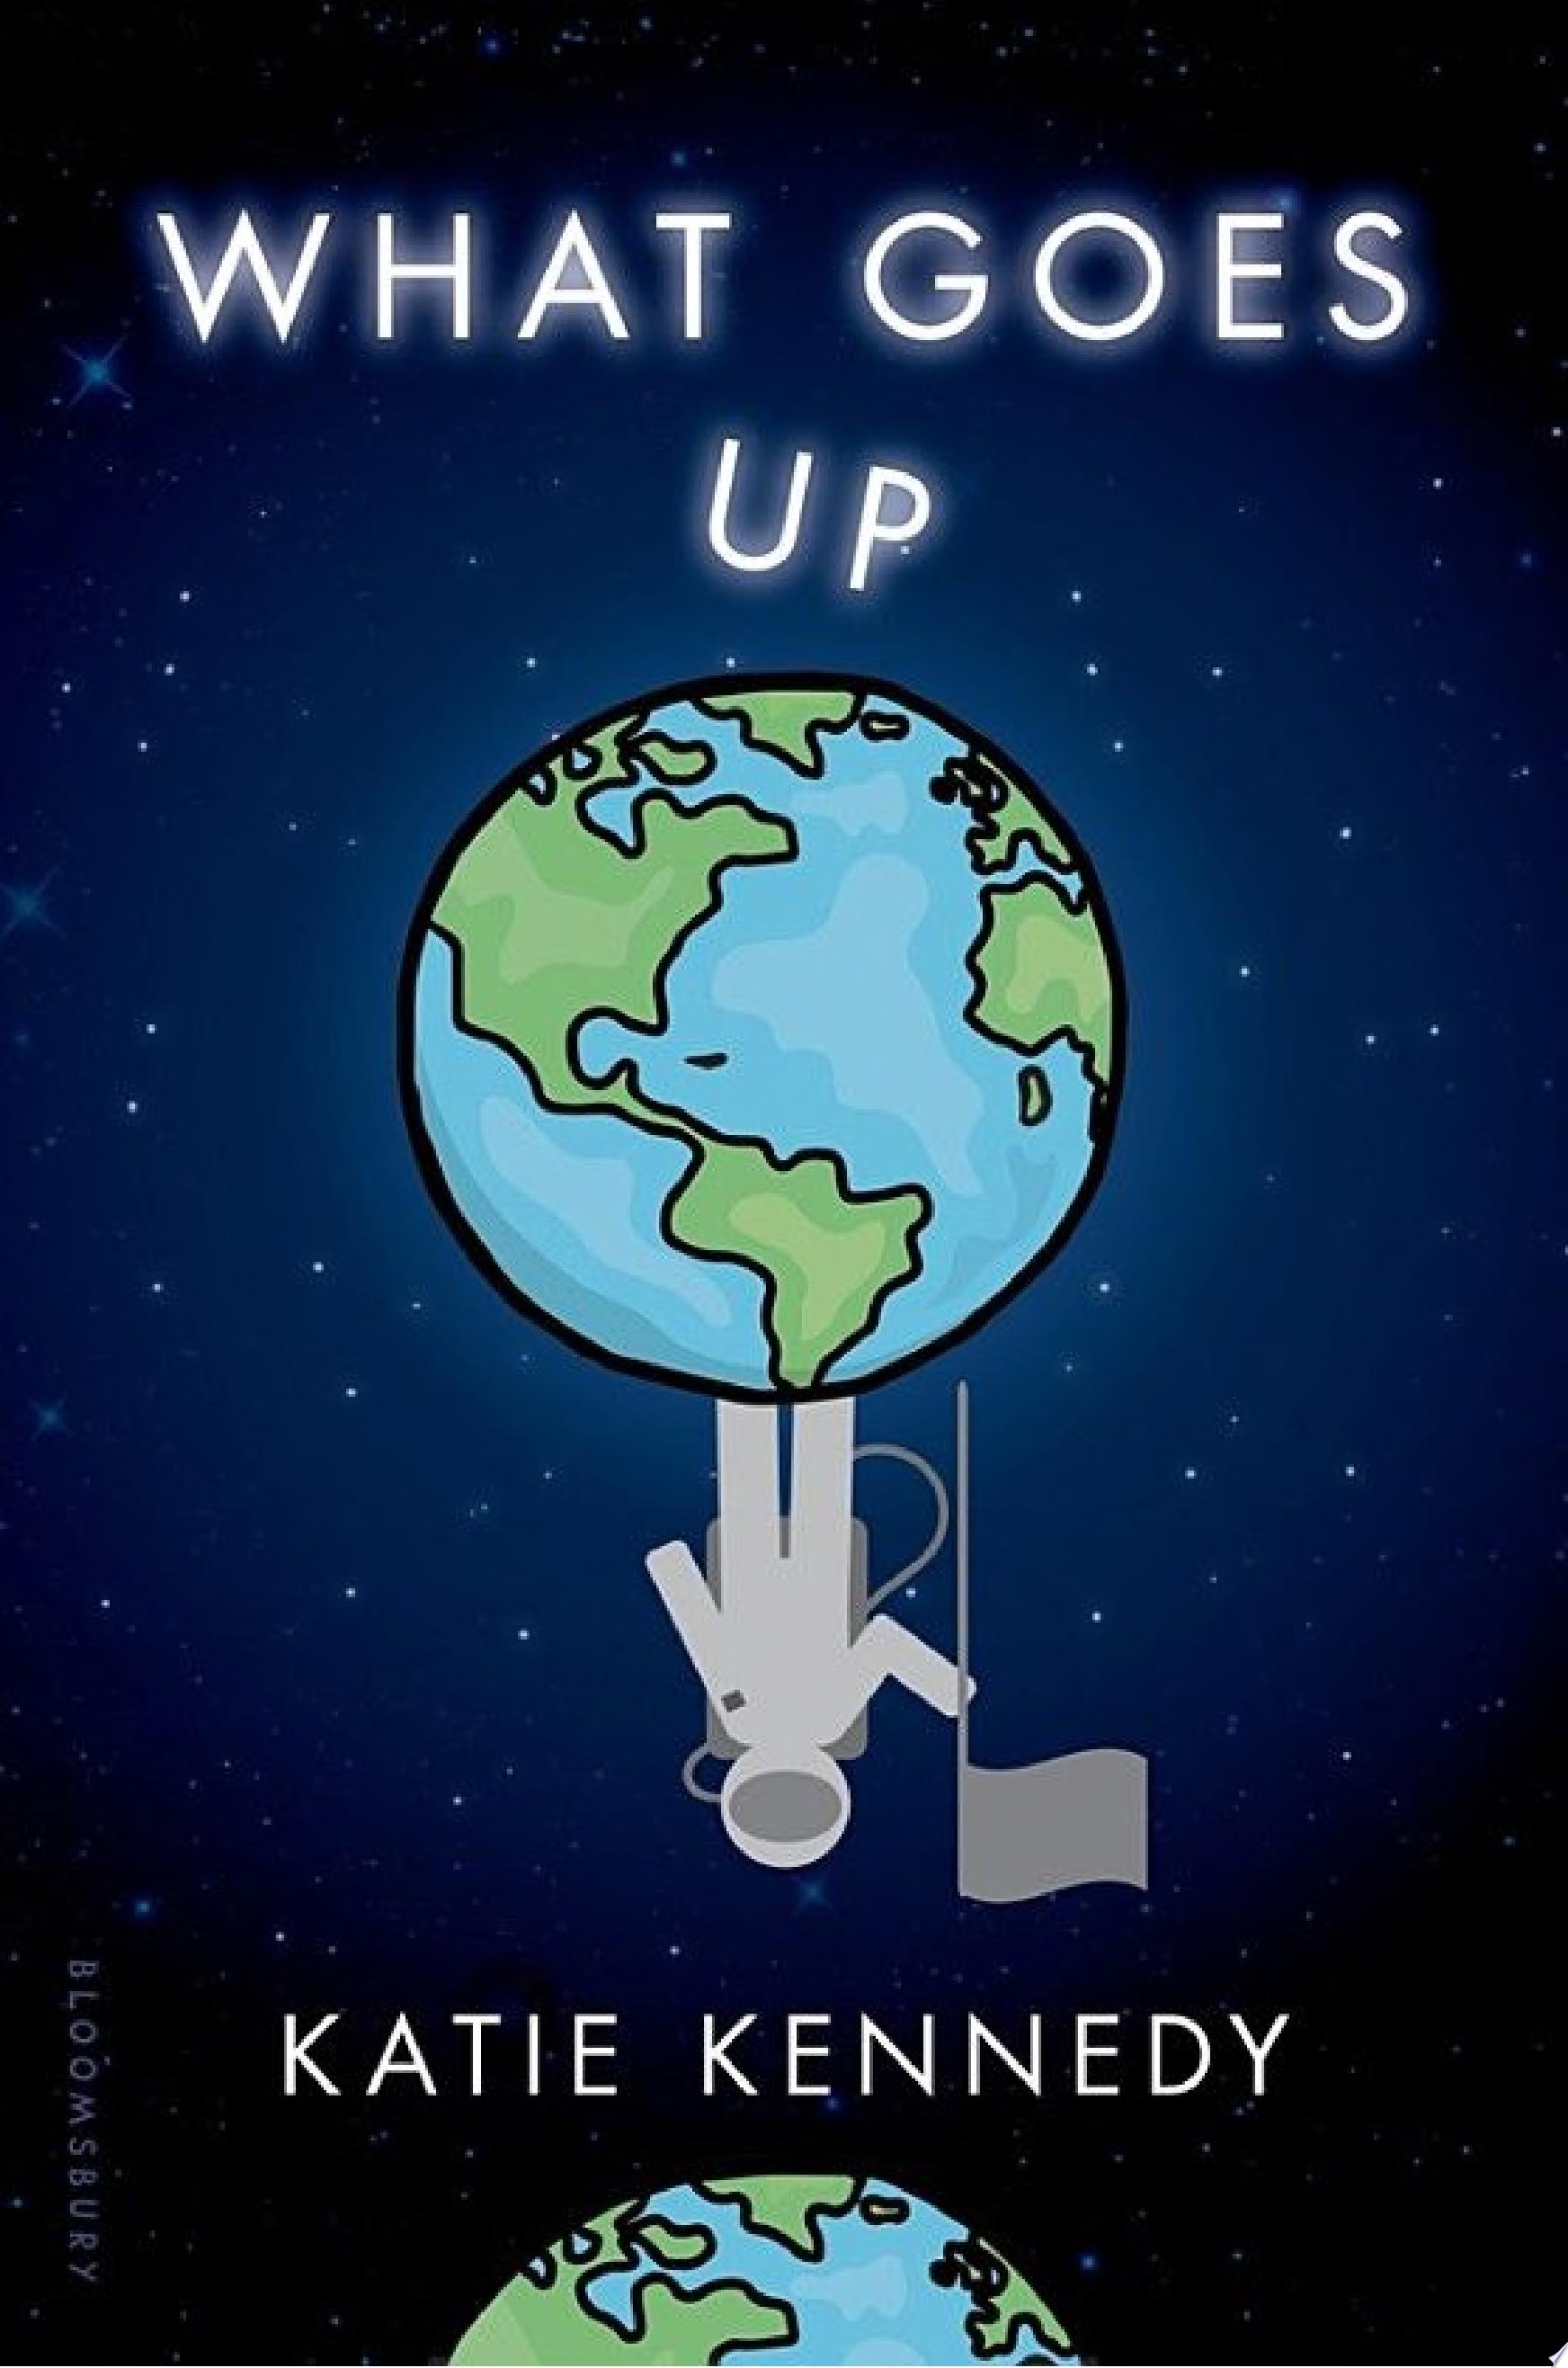 Image for "What Goes Up"